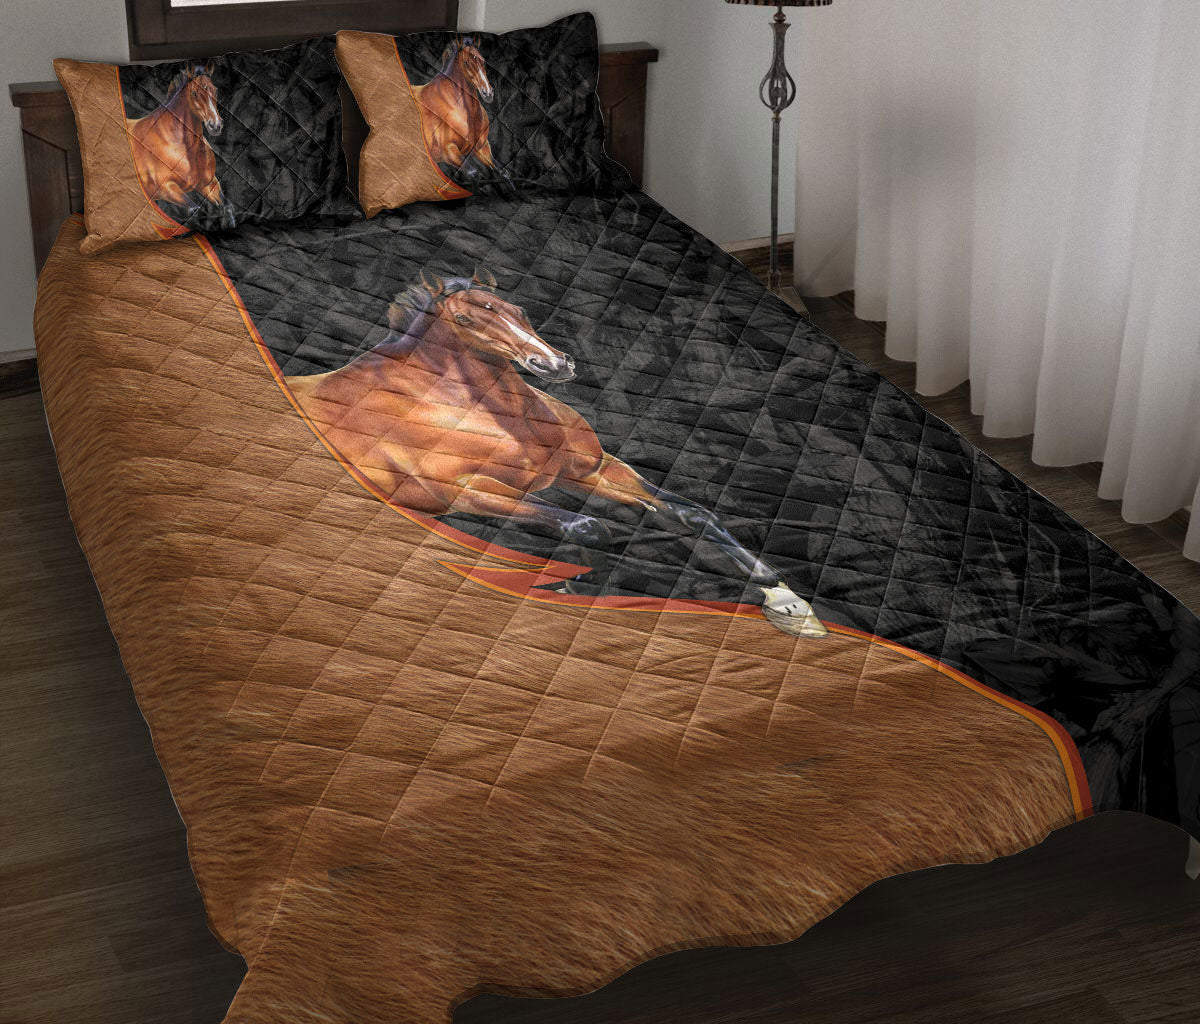 Ohaprints-Quilt-Bed-Set-Pillowcase-Wild-Horse-In-Jungle-Running-Black-&-Brown-Pattern-Gift-For-Horse-Animal-Lover-Blanket-Bedspread-Bedding-2630-Throw (55'' x 60'')